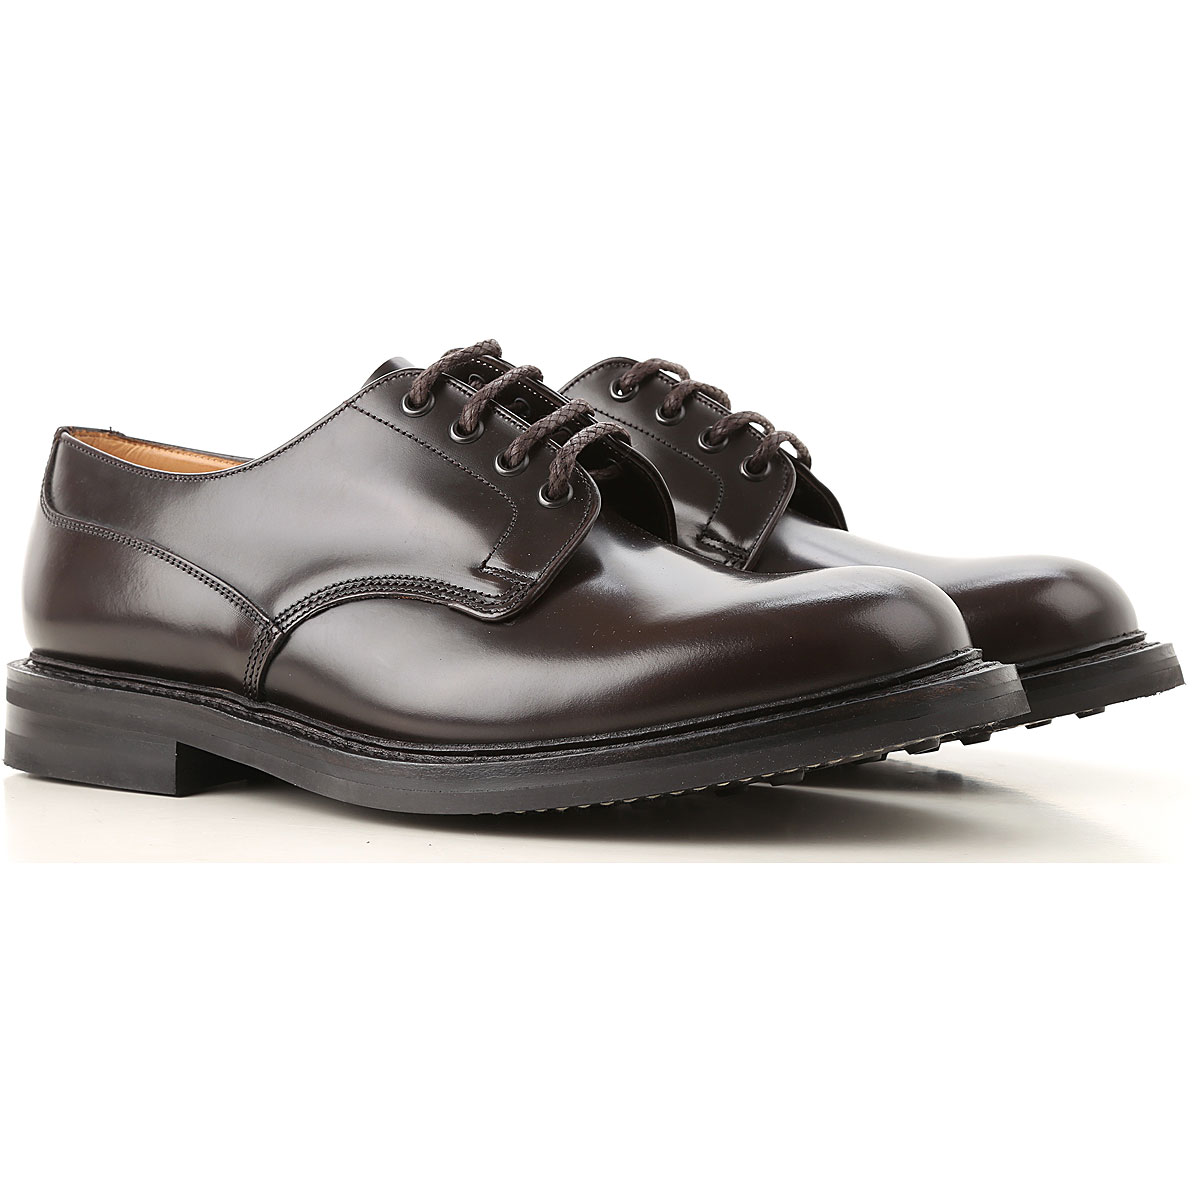 Mens Shoes Church's, Style code: eec176-9xv-f0ama